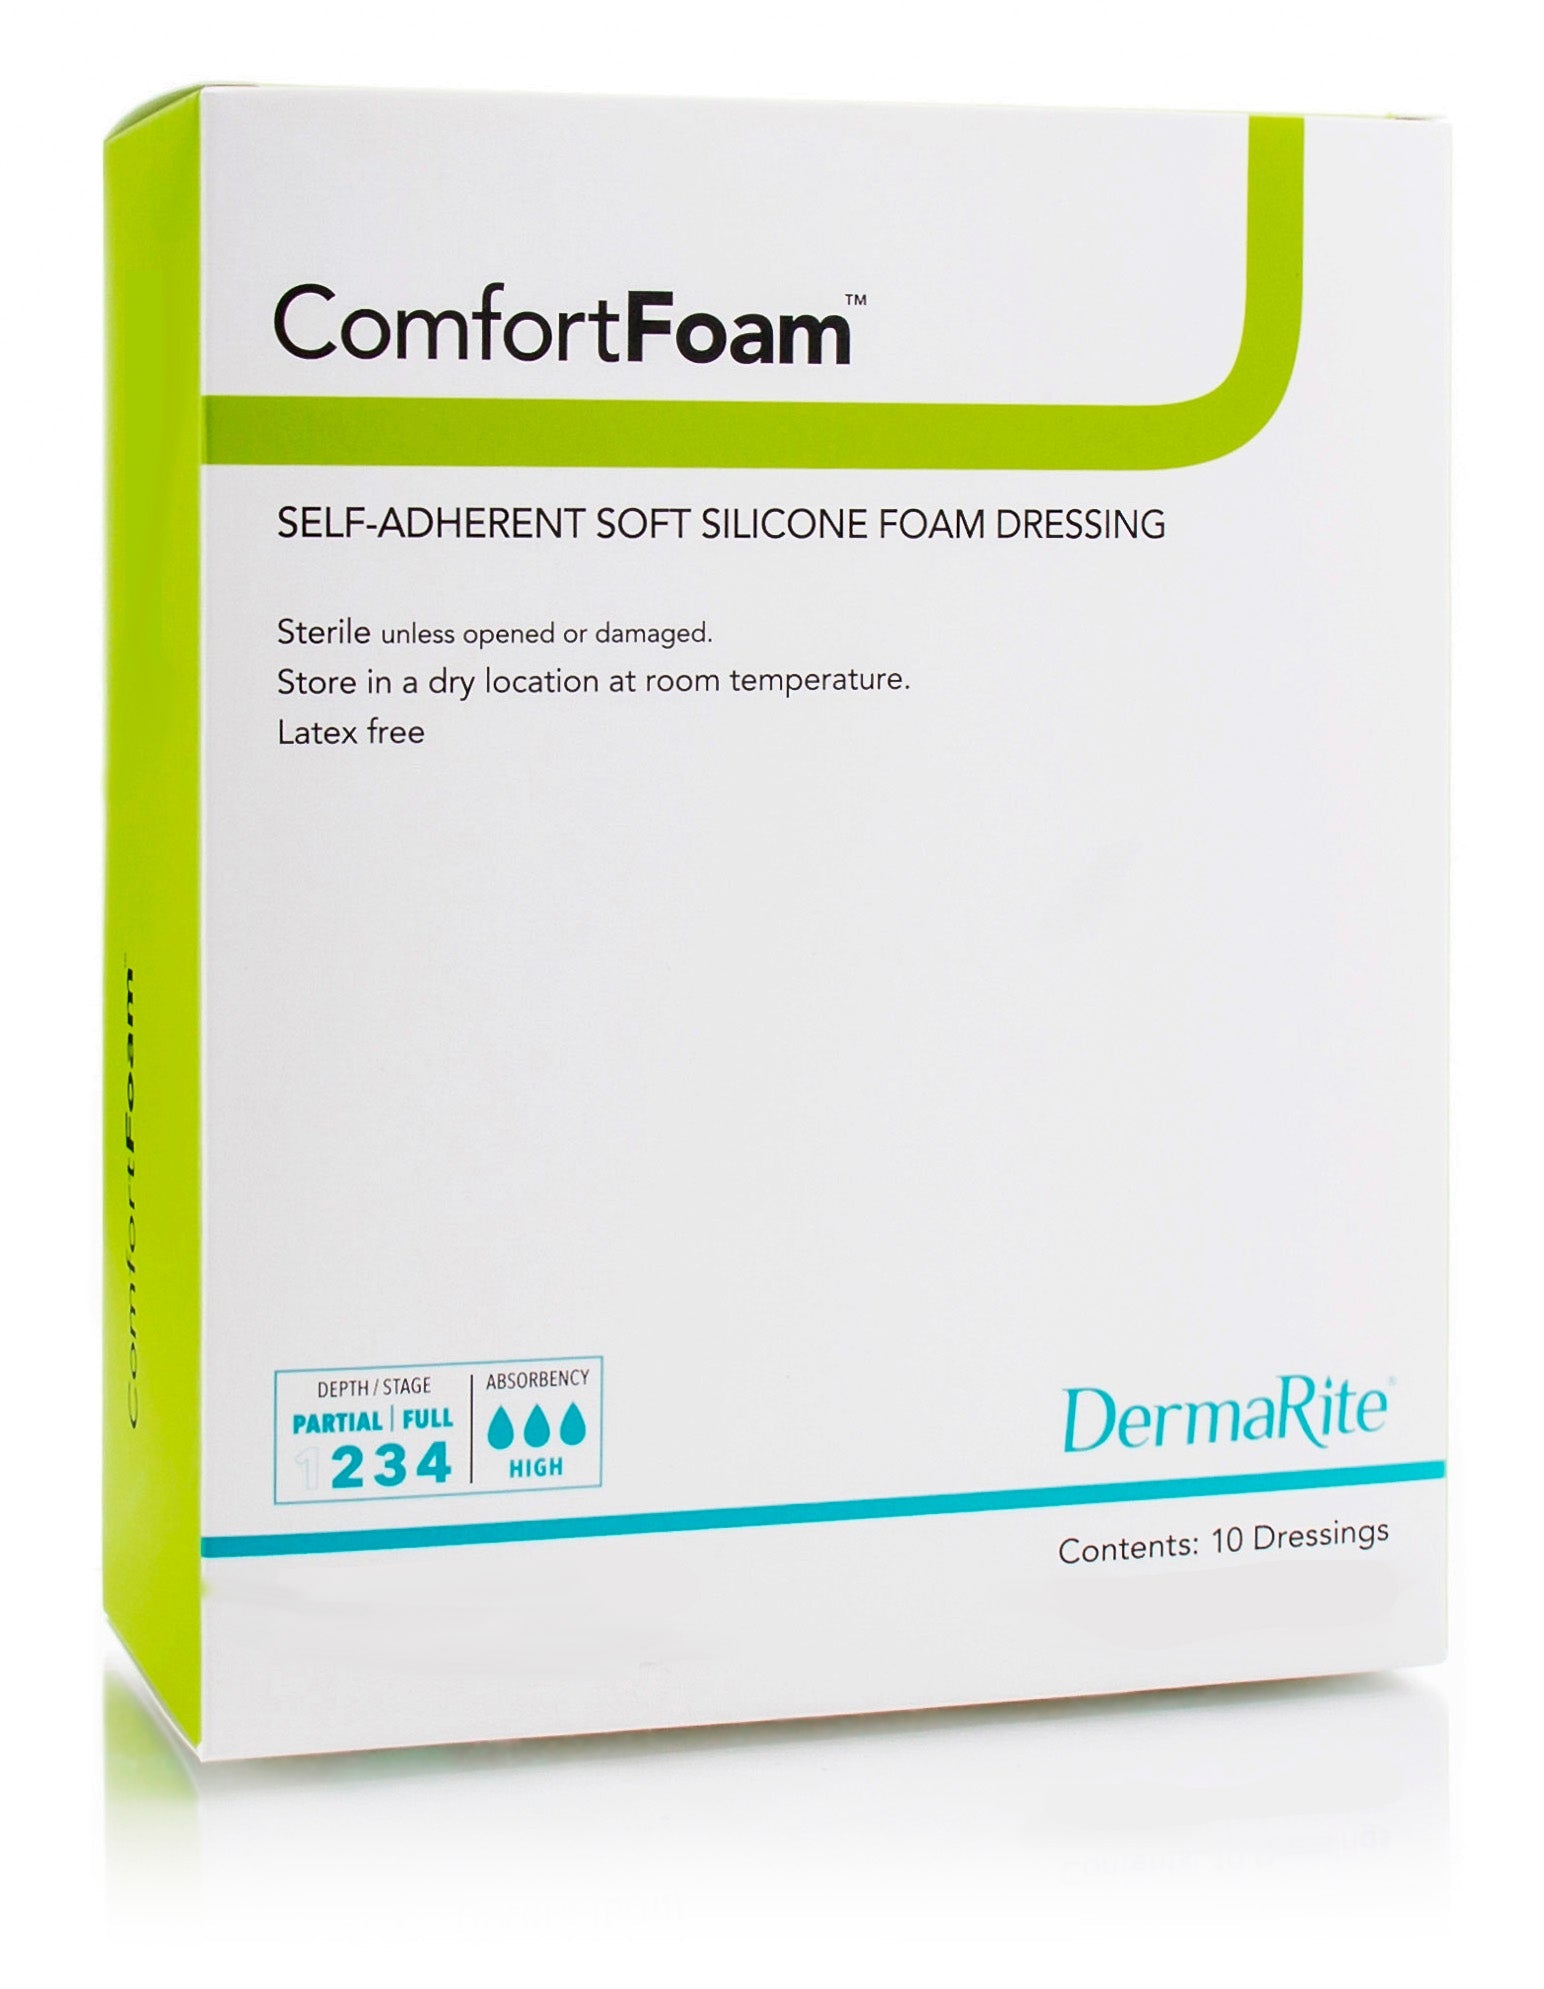 ComfortFoam Silicone Adhesive without Border Silicone Foam Dressing, 2 x 2 Inch -2 X 2 Inch